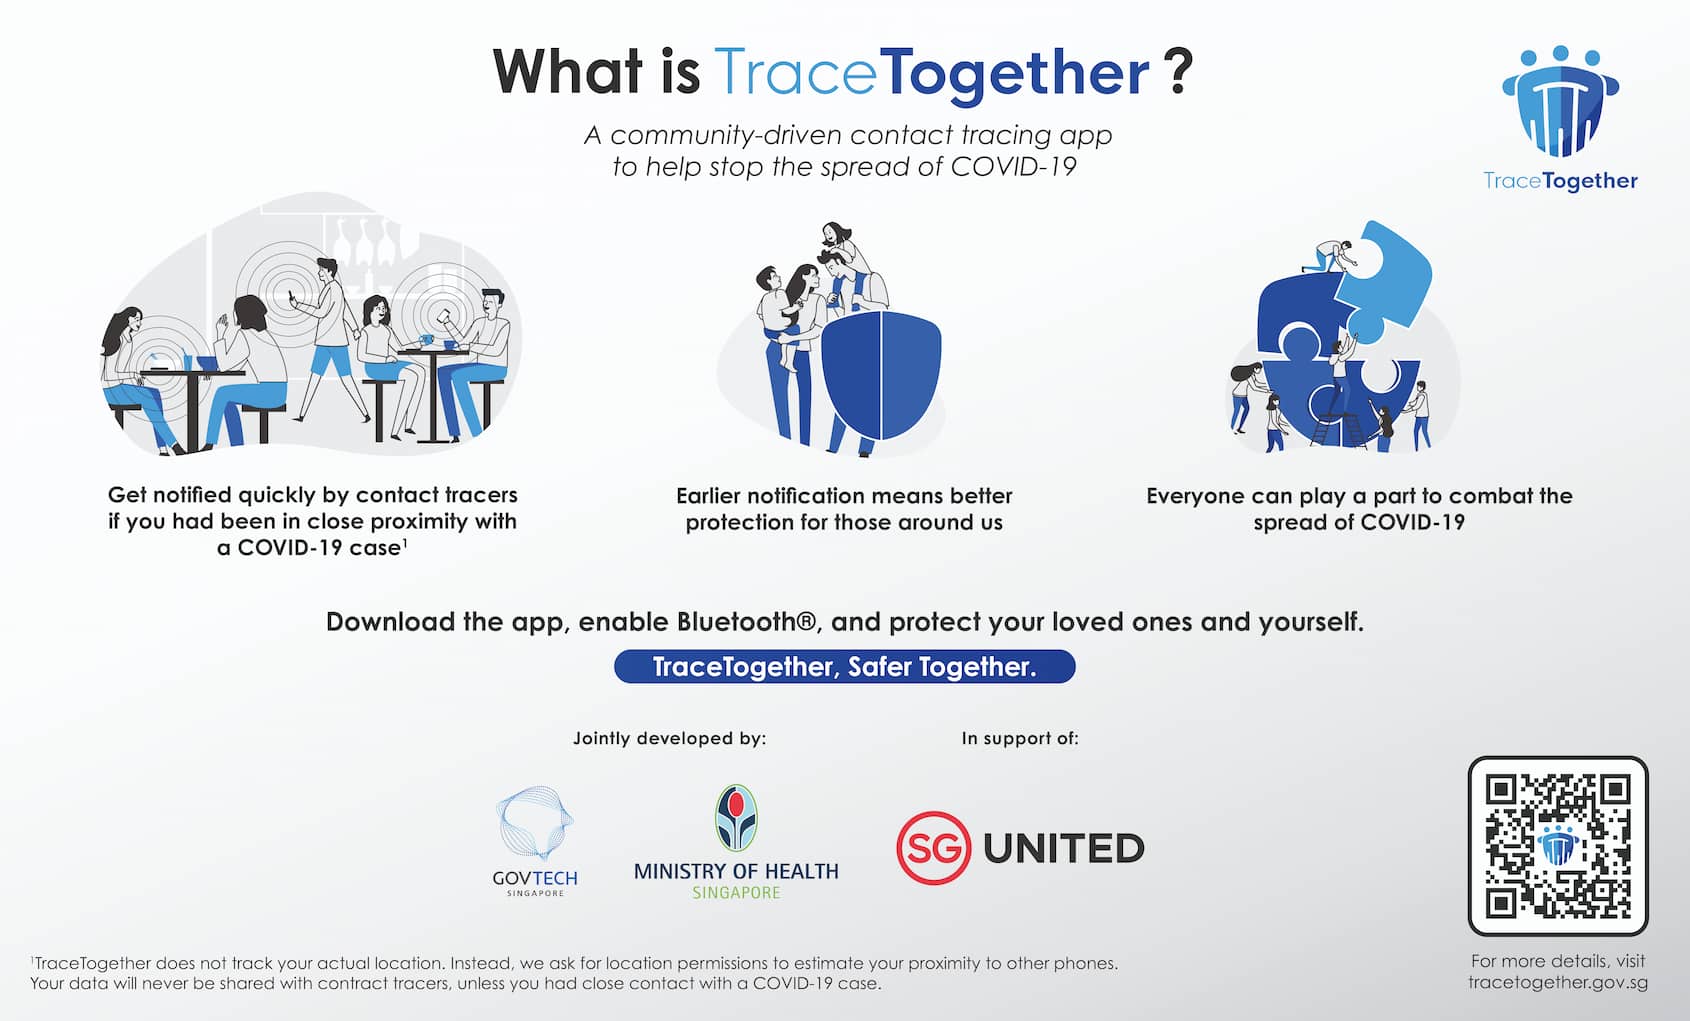 TraceTogether explanation and how it can help contain COVID-19